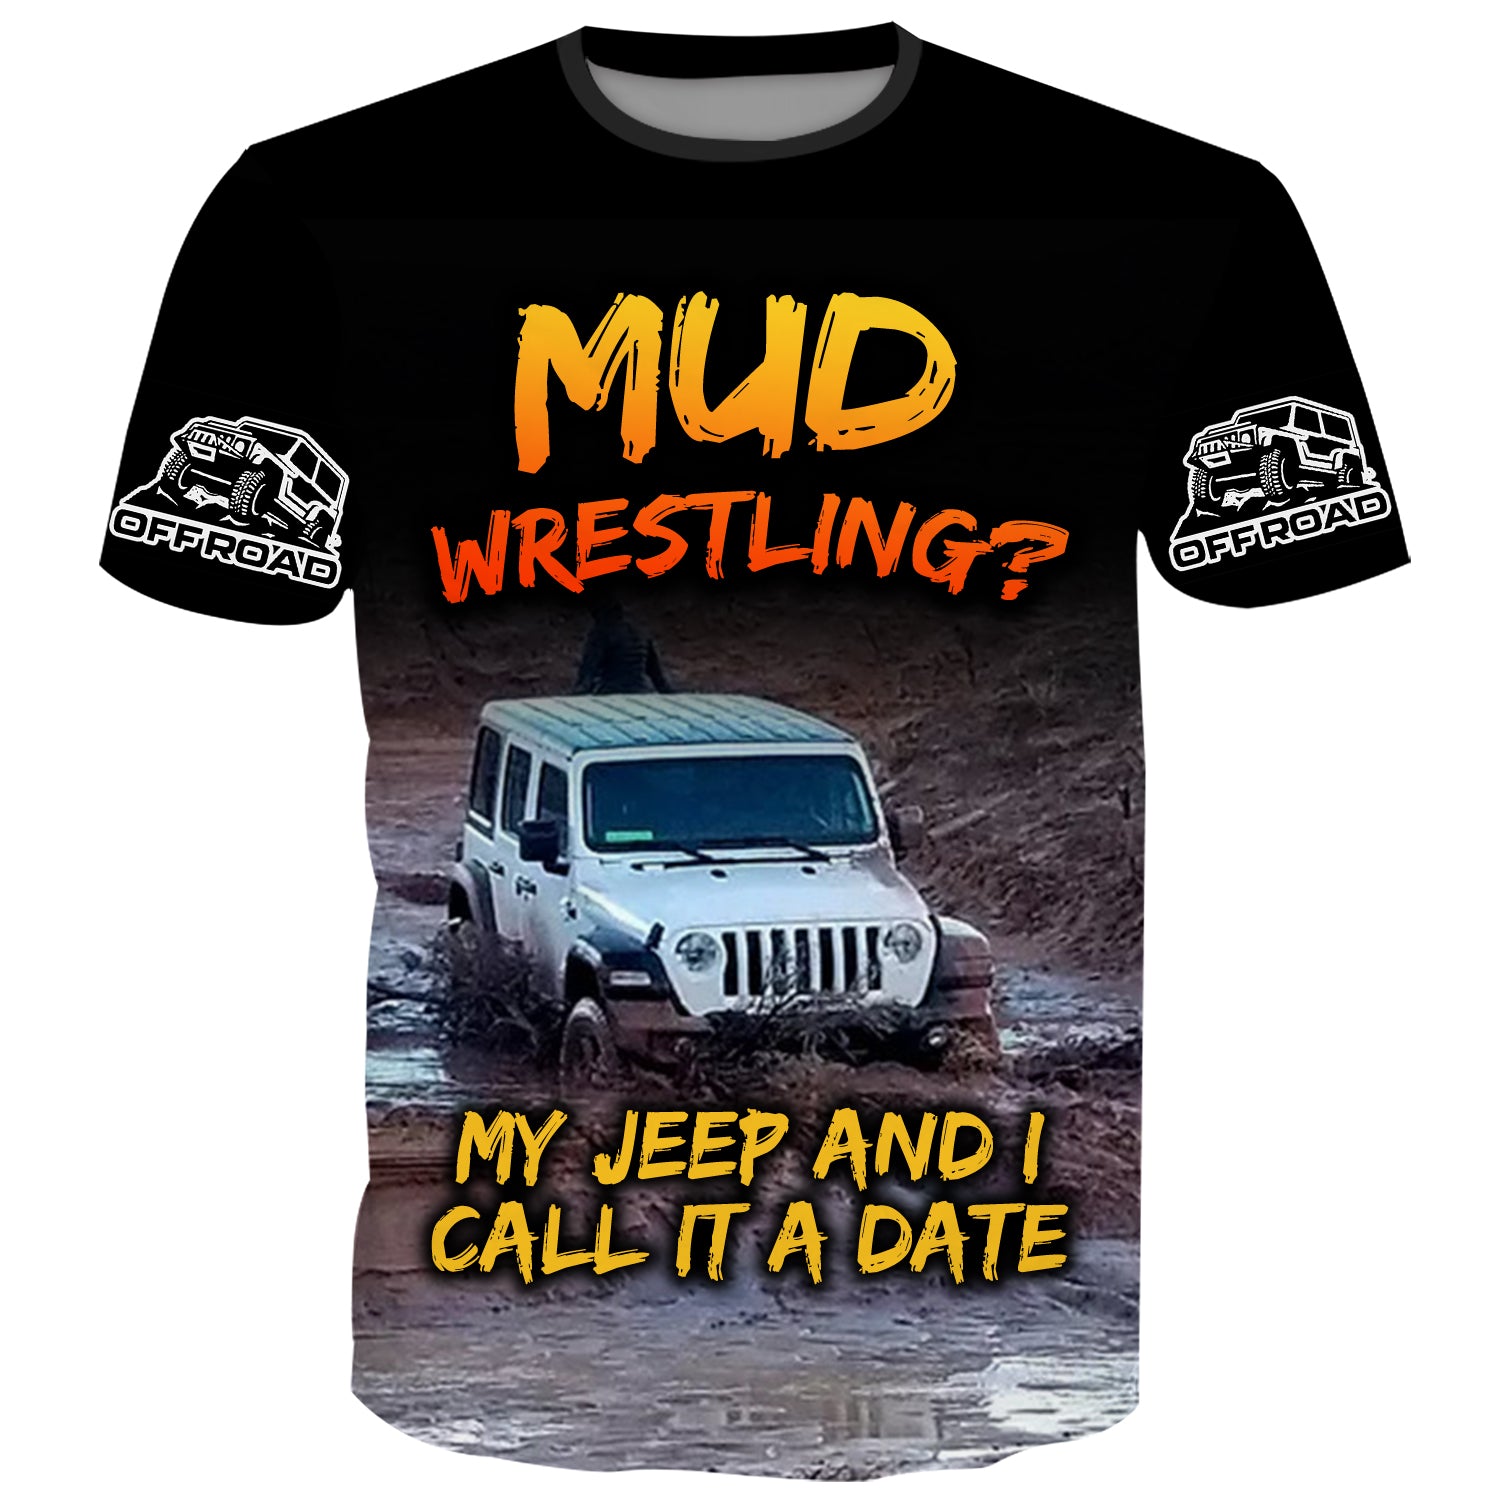 Muddy Wrestling? My Jeep and I call it a Date - T-Shirt